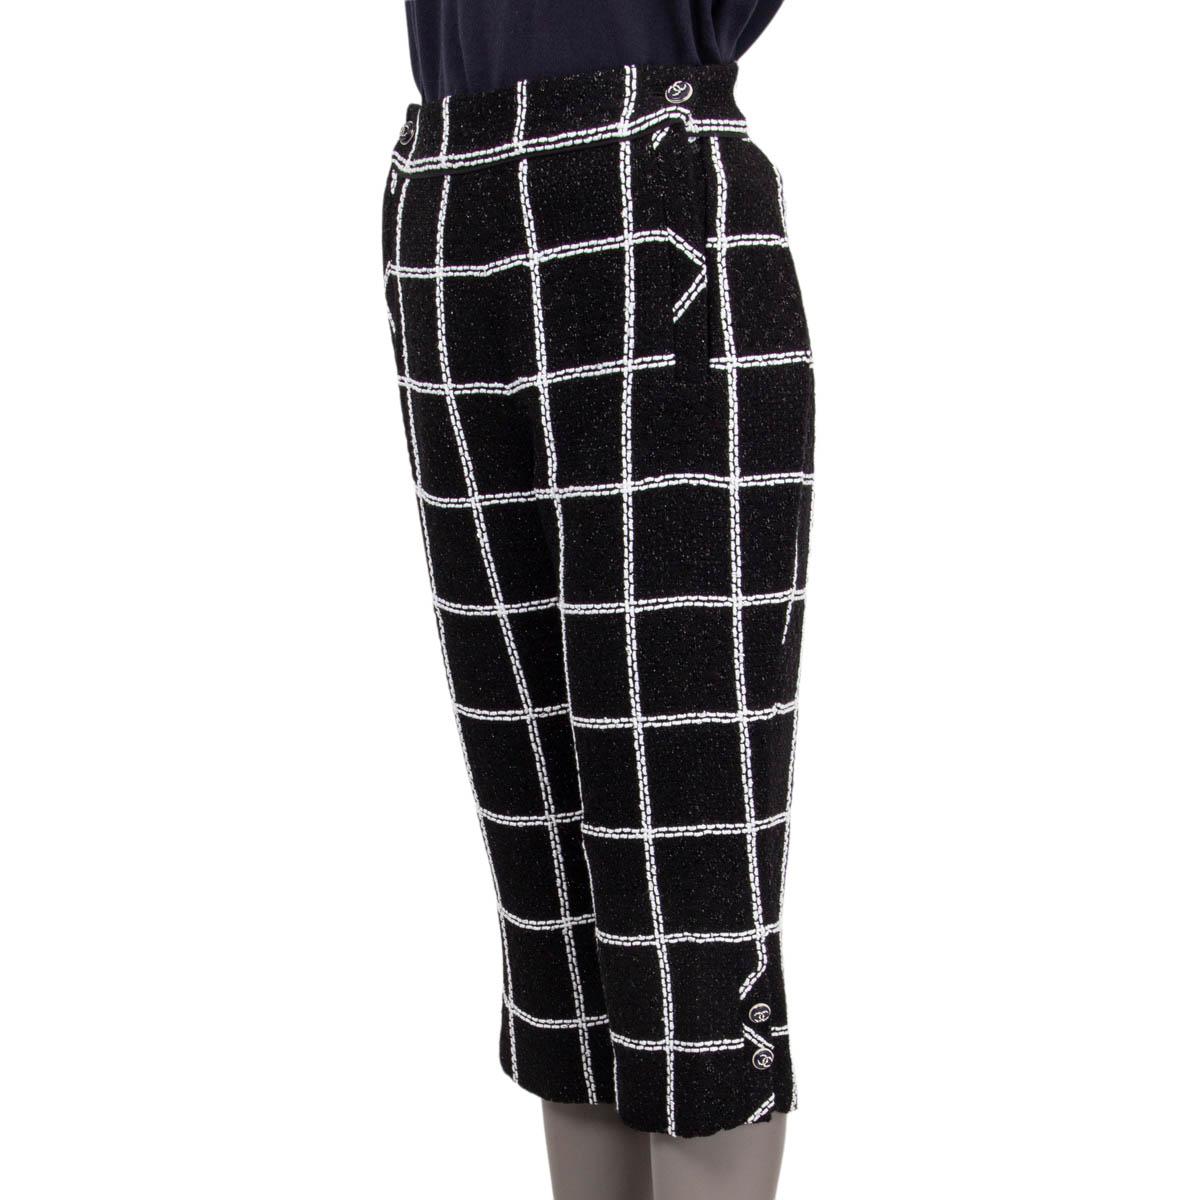 100% authentic Chanel check 3/4 tweed pants in black and white viscose (74%), polyamide (9%), polyester (9%), acrylic (4%), cotton (3%) and wool (1%). Open with two 'CC' buttons and two concealed zippers on the front. Lined in black silk (87%) and